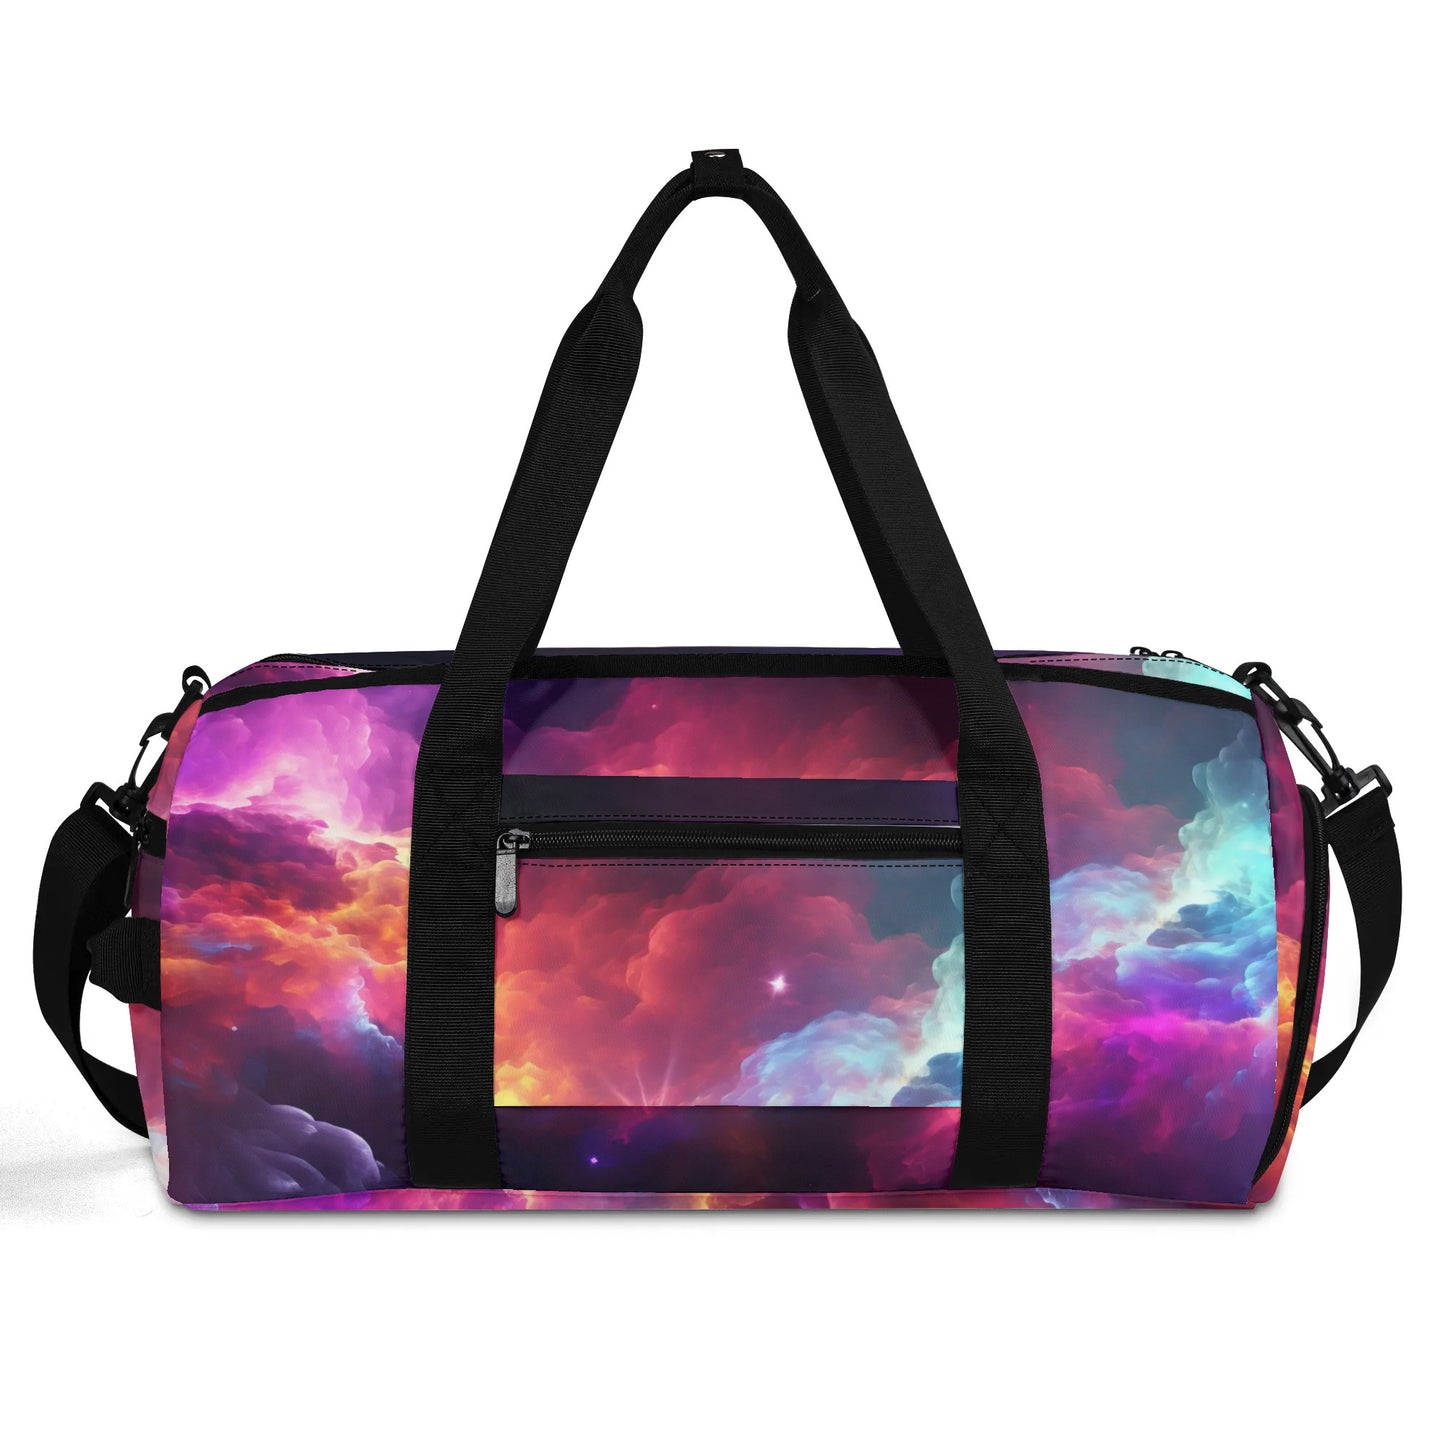 Out of This World- Duffle Bag